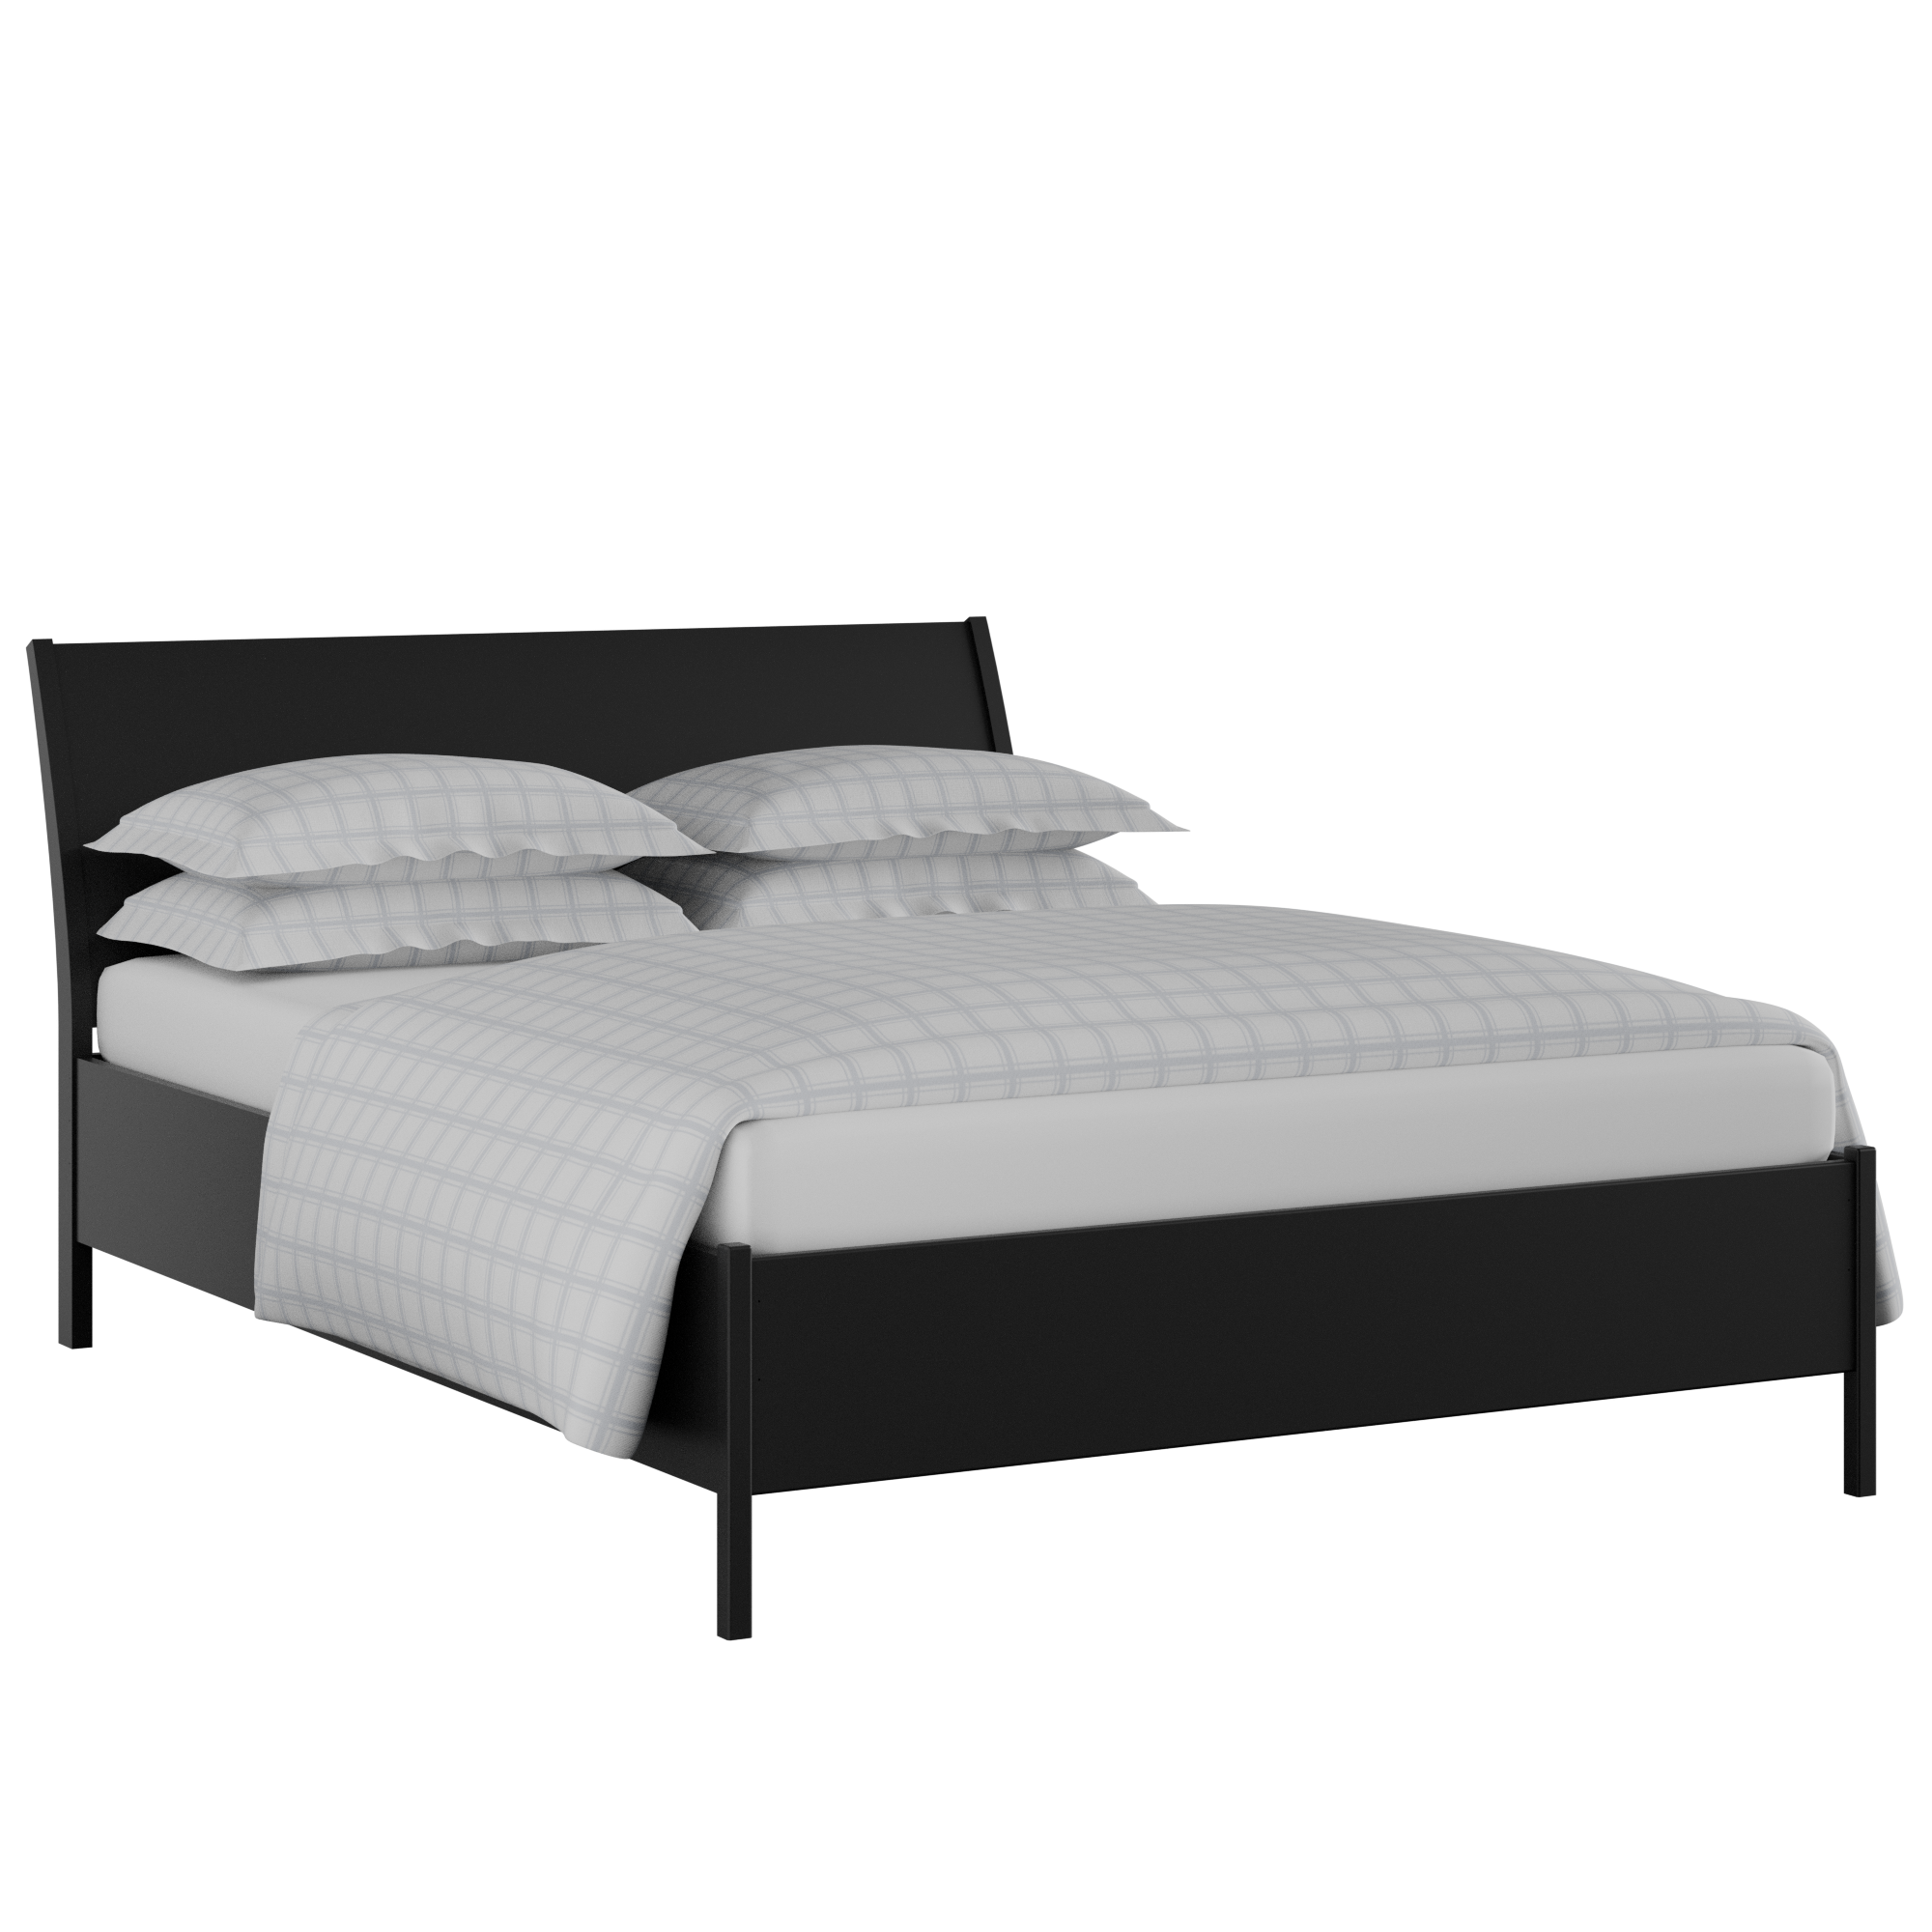 Hunt Painted painted wood bed in black with Juno mattress